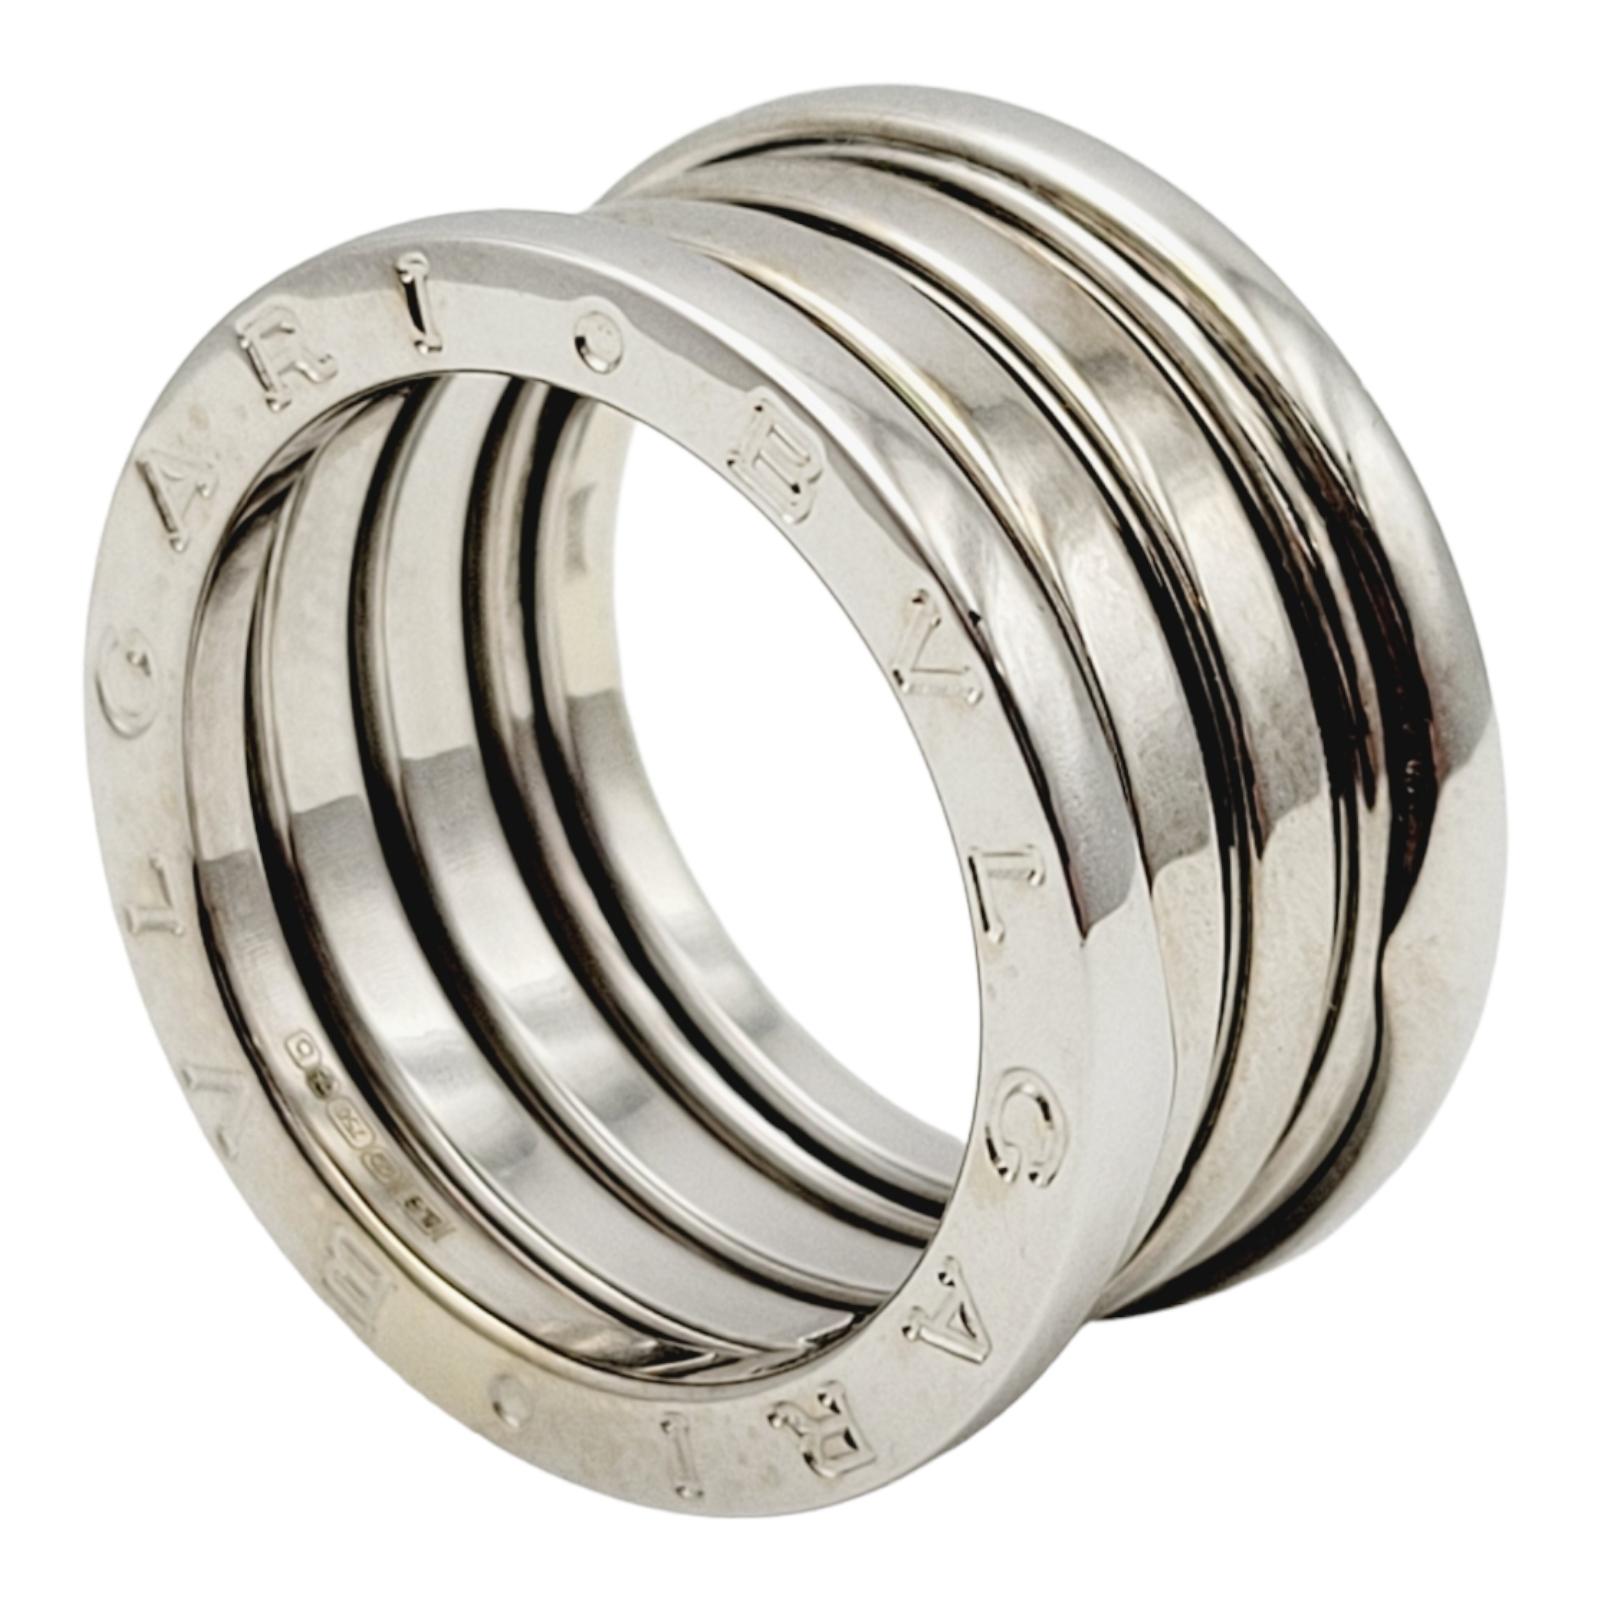 Ring size: 7.25 (55 EU)

Introducing the Bulgari B.ZERO1 Logo Etched Wide Modern Band Ring in 18-Karat White Gold. This exquisite piece draws inspiration from the iconic Colosseum, representing Bulgari's unparalleled creativity in jewelry design.